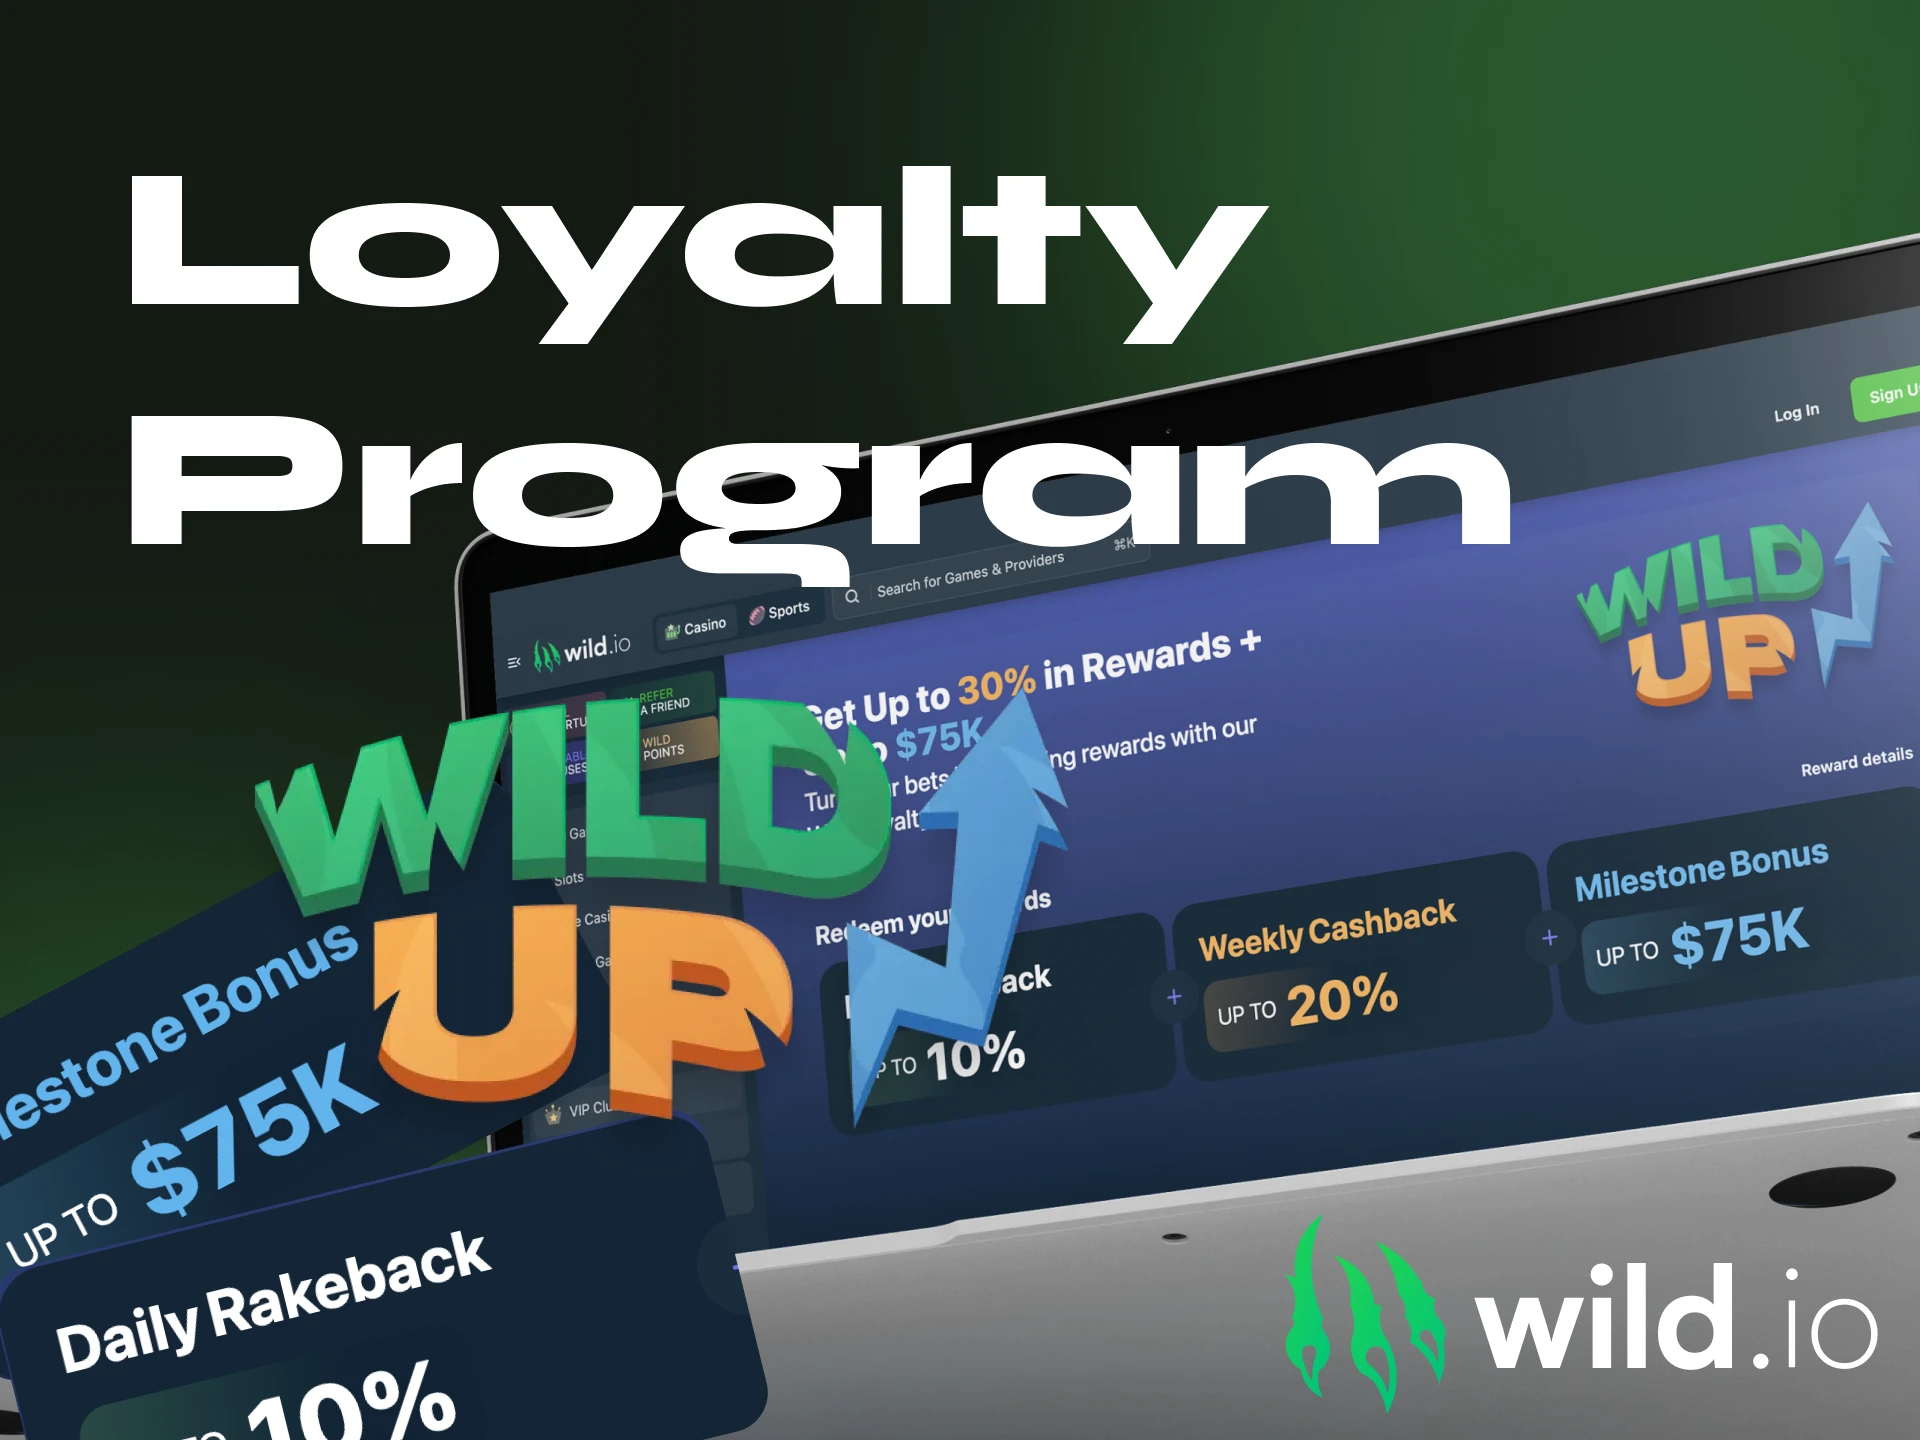 Is there a Loyalty program at the Wildio online casino.